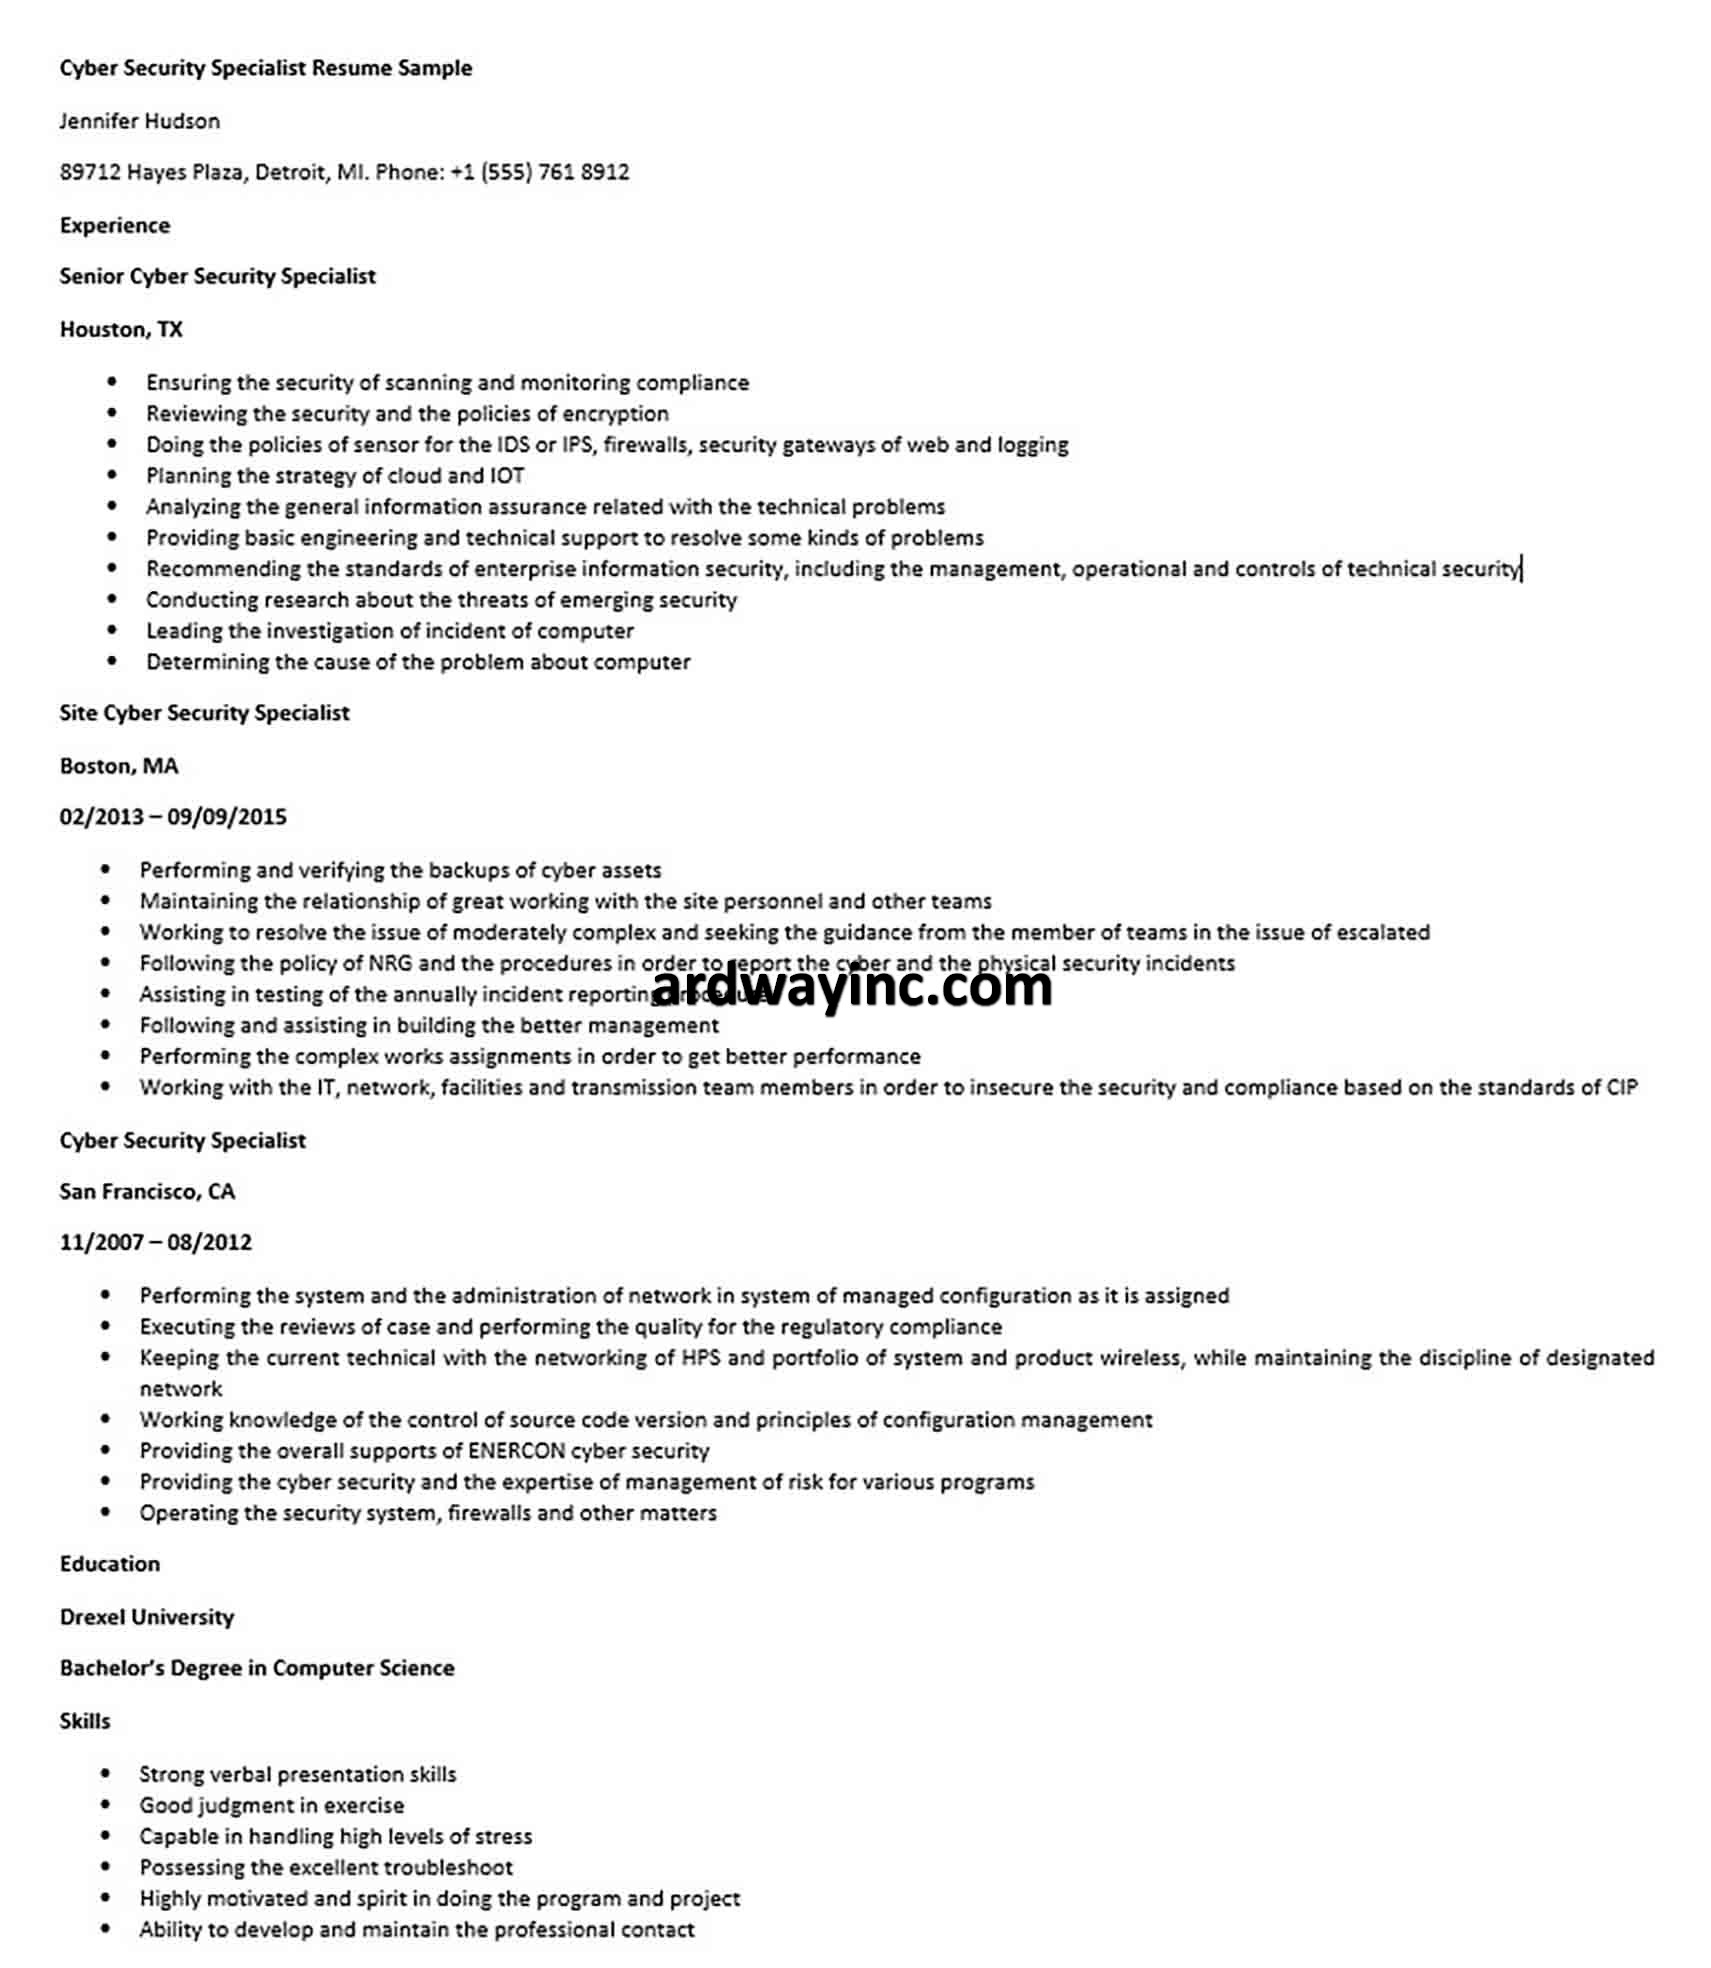 Cyber Security Specialist Resume Sample